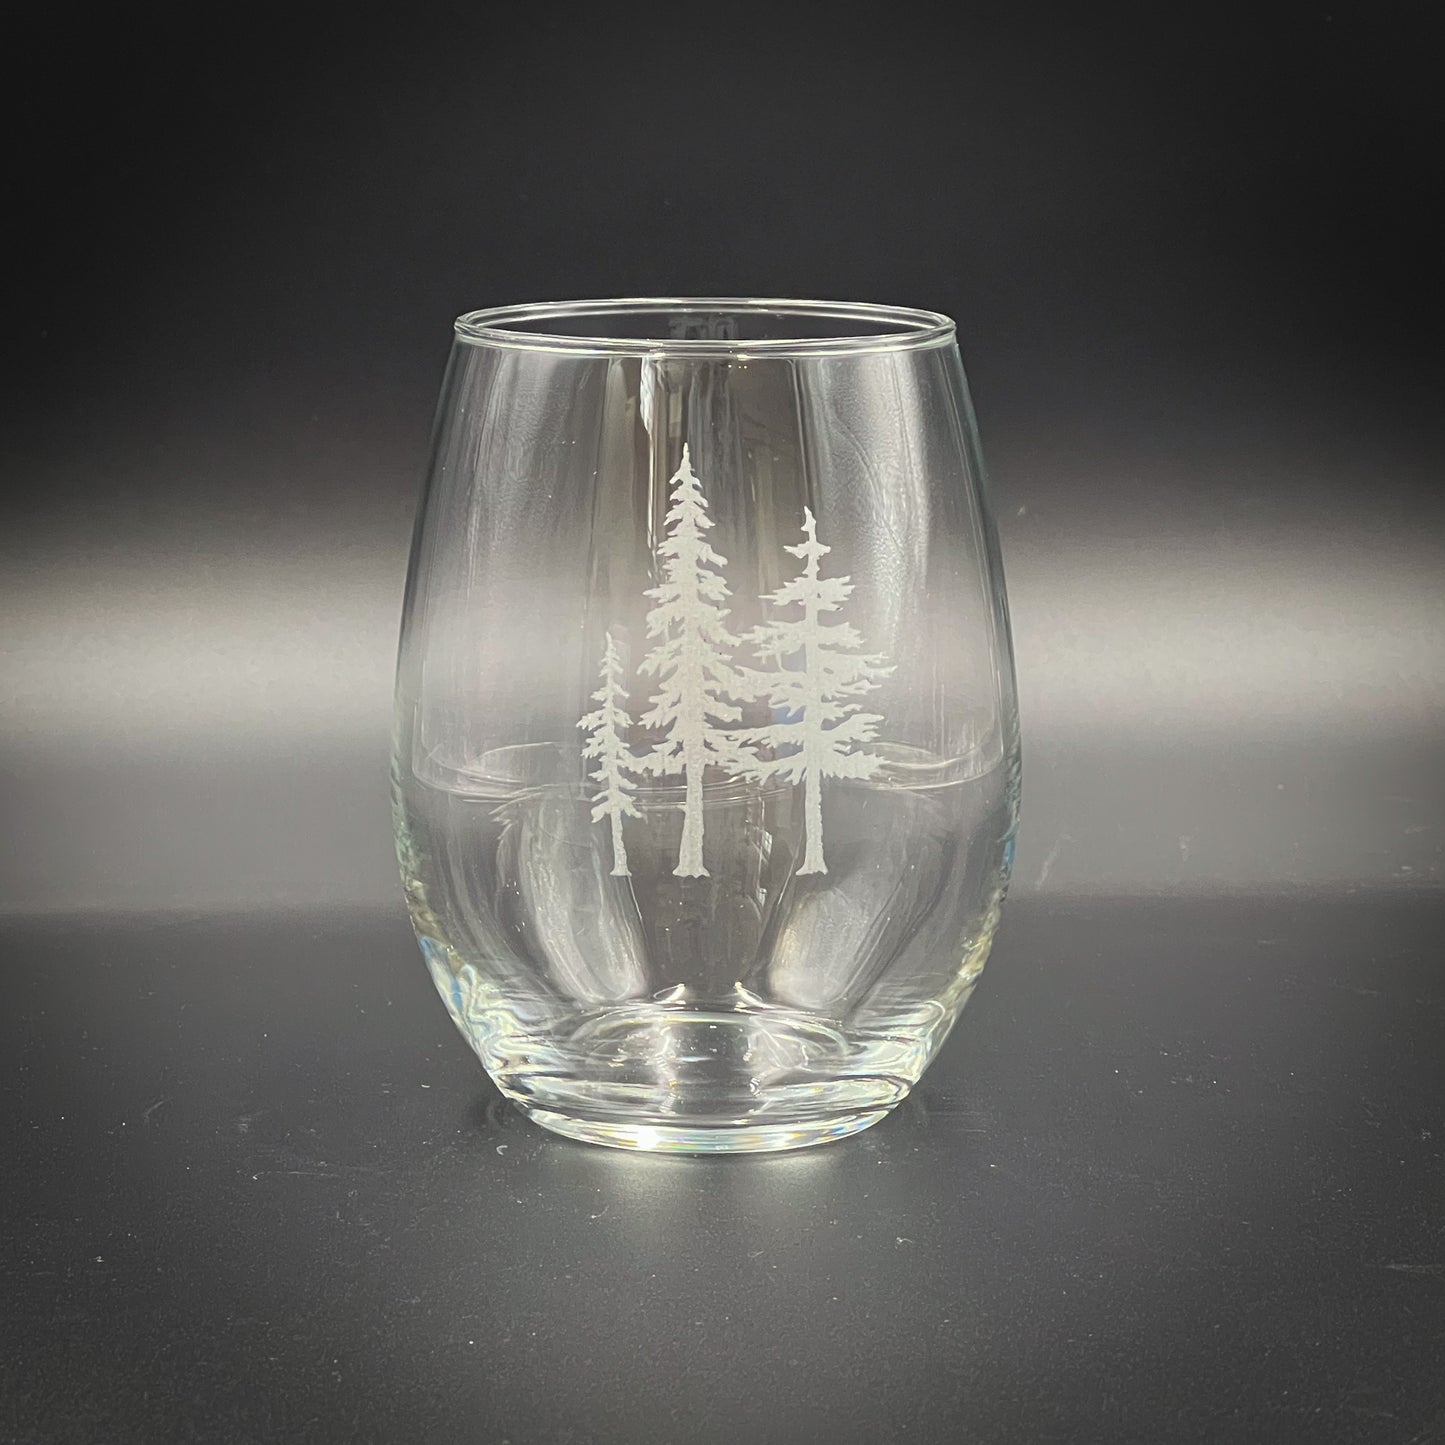 3 Trees - Etched 15 oz Stemless Wine Glass